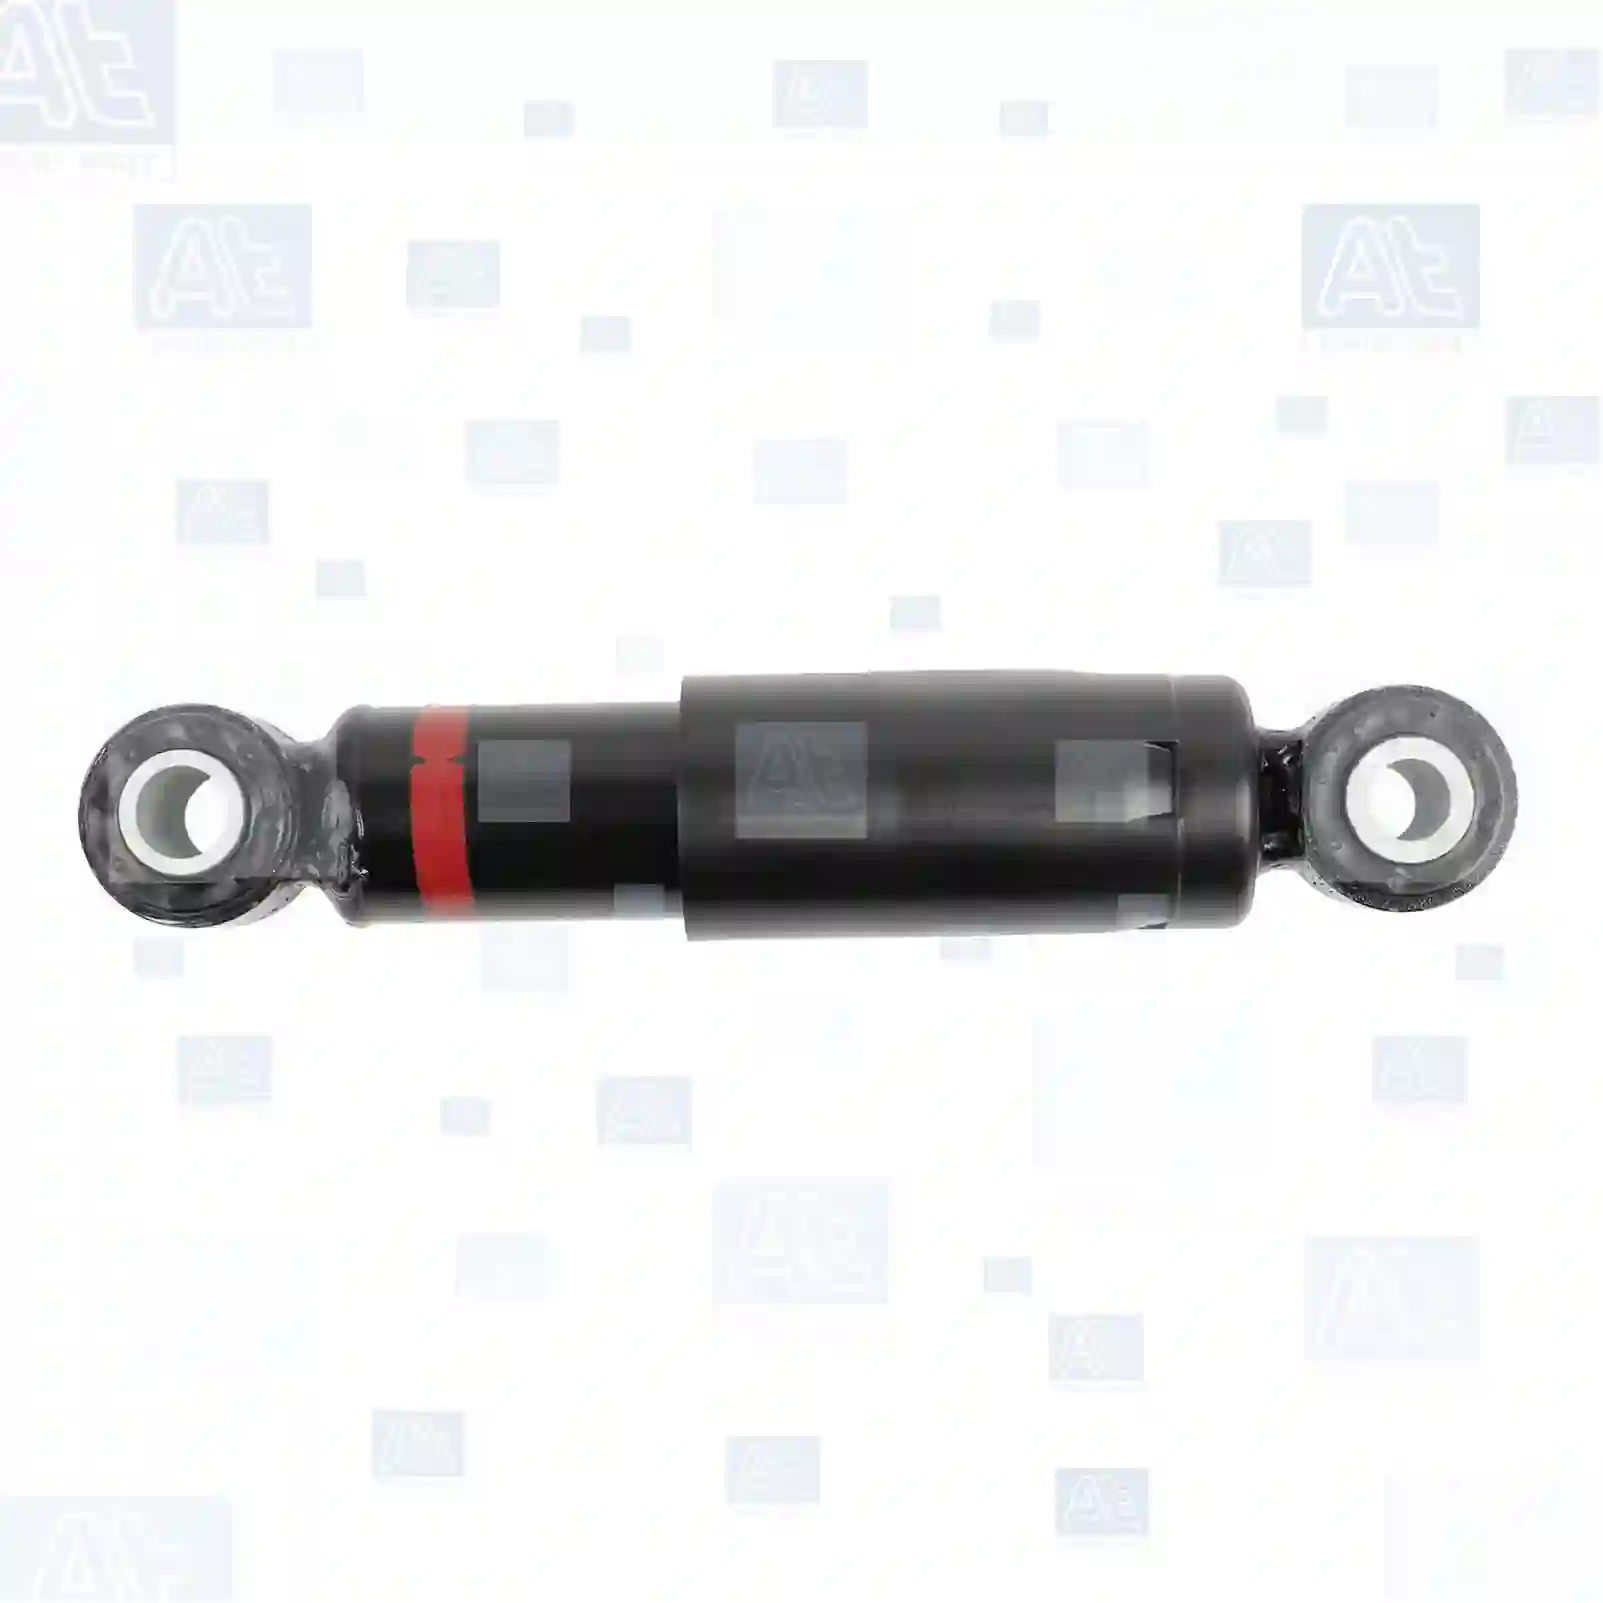 Cabin shock absorber, 77735606, 500348789, 98426021, 98472611, 98487778, 98487780, 99433007, 99433008, 99433009, 99454195, 99454196, 99454197, 08139025, 42555628, 42555629, 500348789, 504228086, 98426021, 98472611, 98487778, 98487780, 99431373, 99431377, 99433007, 99433008, 99433009, 99454195, 99454196, 99454197, 500348789, 98426021, 98472611, 98487778, 98487780, 99433007, 99433008, 99433009, 99454195, 99454196, 99454197 ||  77735606 At Spare Part | Engine, Accelerator Pedal, Camshaft, Connecting Rod, Crankcase, Crankshaft, Cylinder Head, Engine Suspension Mountings, Exhaust Manifold, Exhaust Gas Recirculation, Filter Kits, Flywheel Housing, General Overhaul Kits, Engine, Intake Manifold, Oil Cleaner, Oil Cooler, Oil Filter, Oil Pump, Oil Sump, Piston & Liner, Sensor & Switch, Timing Case, Turbocharger, Cooling System, Belt Tensioner, Coolant Filter, Coolant Pipe, Corrosion Prevention Agent, Drive, Expansion Tank, Fan, Intercooler, Monitors & Gauges, Radiator, Thermostat, V-Belt / Timing belt, Water Pump, Fuel System, Electronical Injector Unit, Feed Pump, Fuel Filter, cpl., Fuel Gauge Sender,  Fuel Line, Fuel Pump, Fuel Tank, Injection Line Kit, Injection Pump, Exhaust System, Clutch & Pedal, Gearbox, Propeller Shaft, Axles, Brake System, Hubs & Wheels, Suspension, Leaf Spring, Universal Parts / Accessories, Steering, Electrical System, Cabin Cabin shock absorber, 77735606, 500348789, 98426021, 98472611, 98487778, 98487780, 99433007, 99433008, 99433009, 99454195, 99454196, 99454197, 08139025, 42555628, 42555629, 500348789, 504228086, 98426021, 98472611, 98487778, 98487780, 99431373, 99431377, 99433007, 99433008, 99433009, 99454195, 99454196, 99454197, 500348789, 98426021, 98472611, 98487778, 98487780, 99433007, 99433008, 99433009, 99454195, 99454196, 99454197 ||  77735606 At Spare Part | Engine, Accelerator Pedal, Camshaft, Connecting Rod, Crankcase, Crankshaft, Cylinder Head, Engine Suspension Mountings, Exhaust Manifold, Exhaust Gas Recirculation, Filter Kits, Flywheel Housing, General Overhaul Kits, Engine, Intake Manifold, Oil Cleaner, Oil Cooler, Oil Filter, Oil Pump, Oil Sump, Piston & Liner, Sensor & Switch, Timing Case, Turbocharger, Cooling System, Belt Tensioner, Coolant Filter, Coolant Pipe, Corrosion Prevention Agent, Drive, Expansion Tank, Fan, Intercooler, Monitors & Gauges, Radiator, Thermostat, V-Belt / Timing belt, Water Pump, Fuel System, Electronical Injector Unit, Feed Pump, Fuel Filter, cpl., Fuel Gauge Sender,  Fuel Line, Fuel Pump, Fuel Tank, Injection Line Kit, Injection Pump, Exhaust System, Clutch & Pedal, Gearbox, Propeller Shaft, Axles, Brake System, Hubs & Wheels, Suspension, Leaf Spring, Universal Parts / Accessories, Steering, Electrical System, Cabin